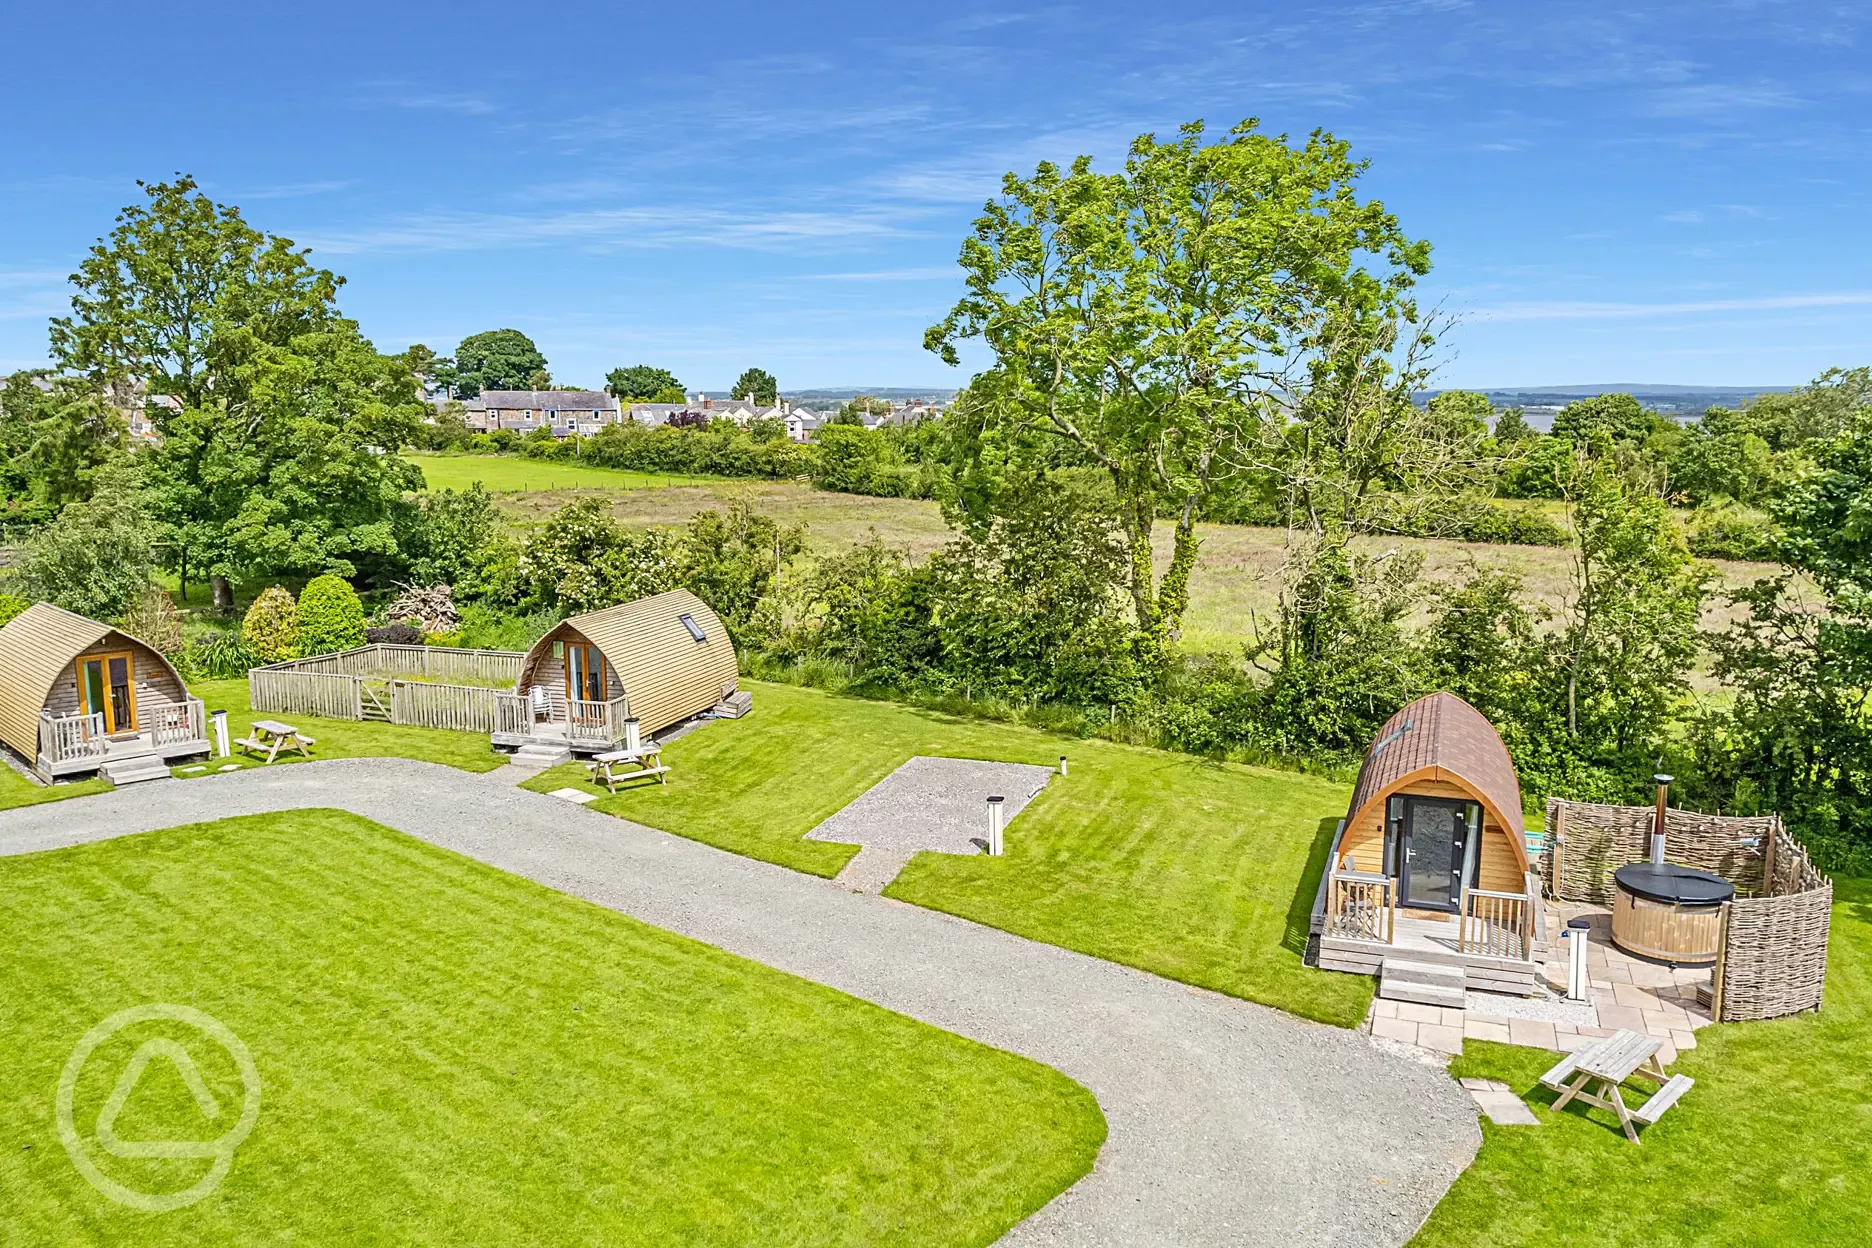 Aerial of the ensuite glamping pods